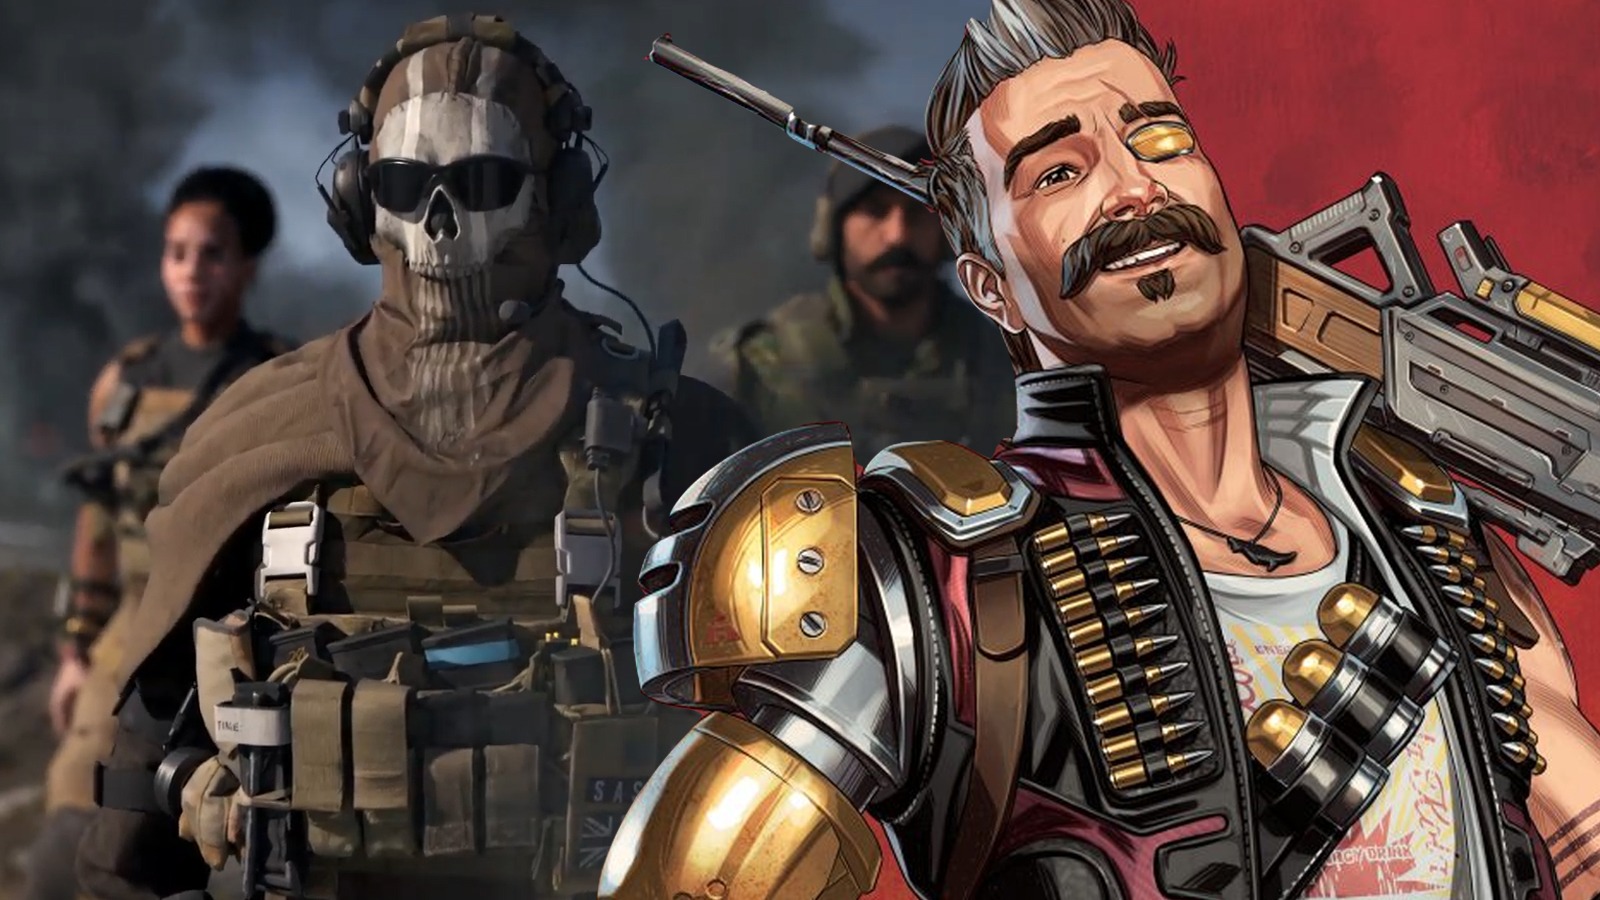 Apex Legends players claim Warzone 2.0 made them "respect" Apex more